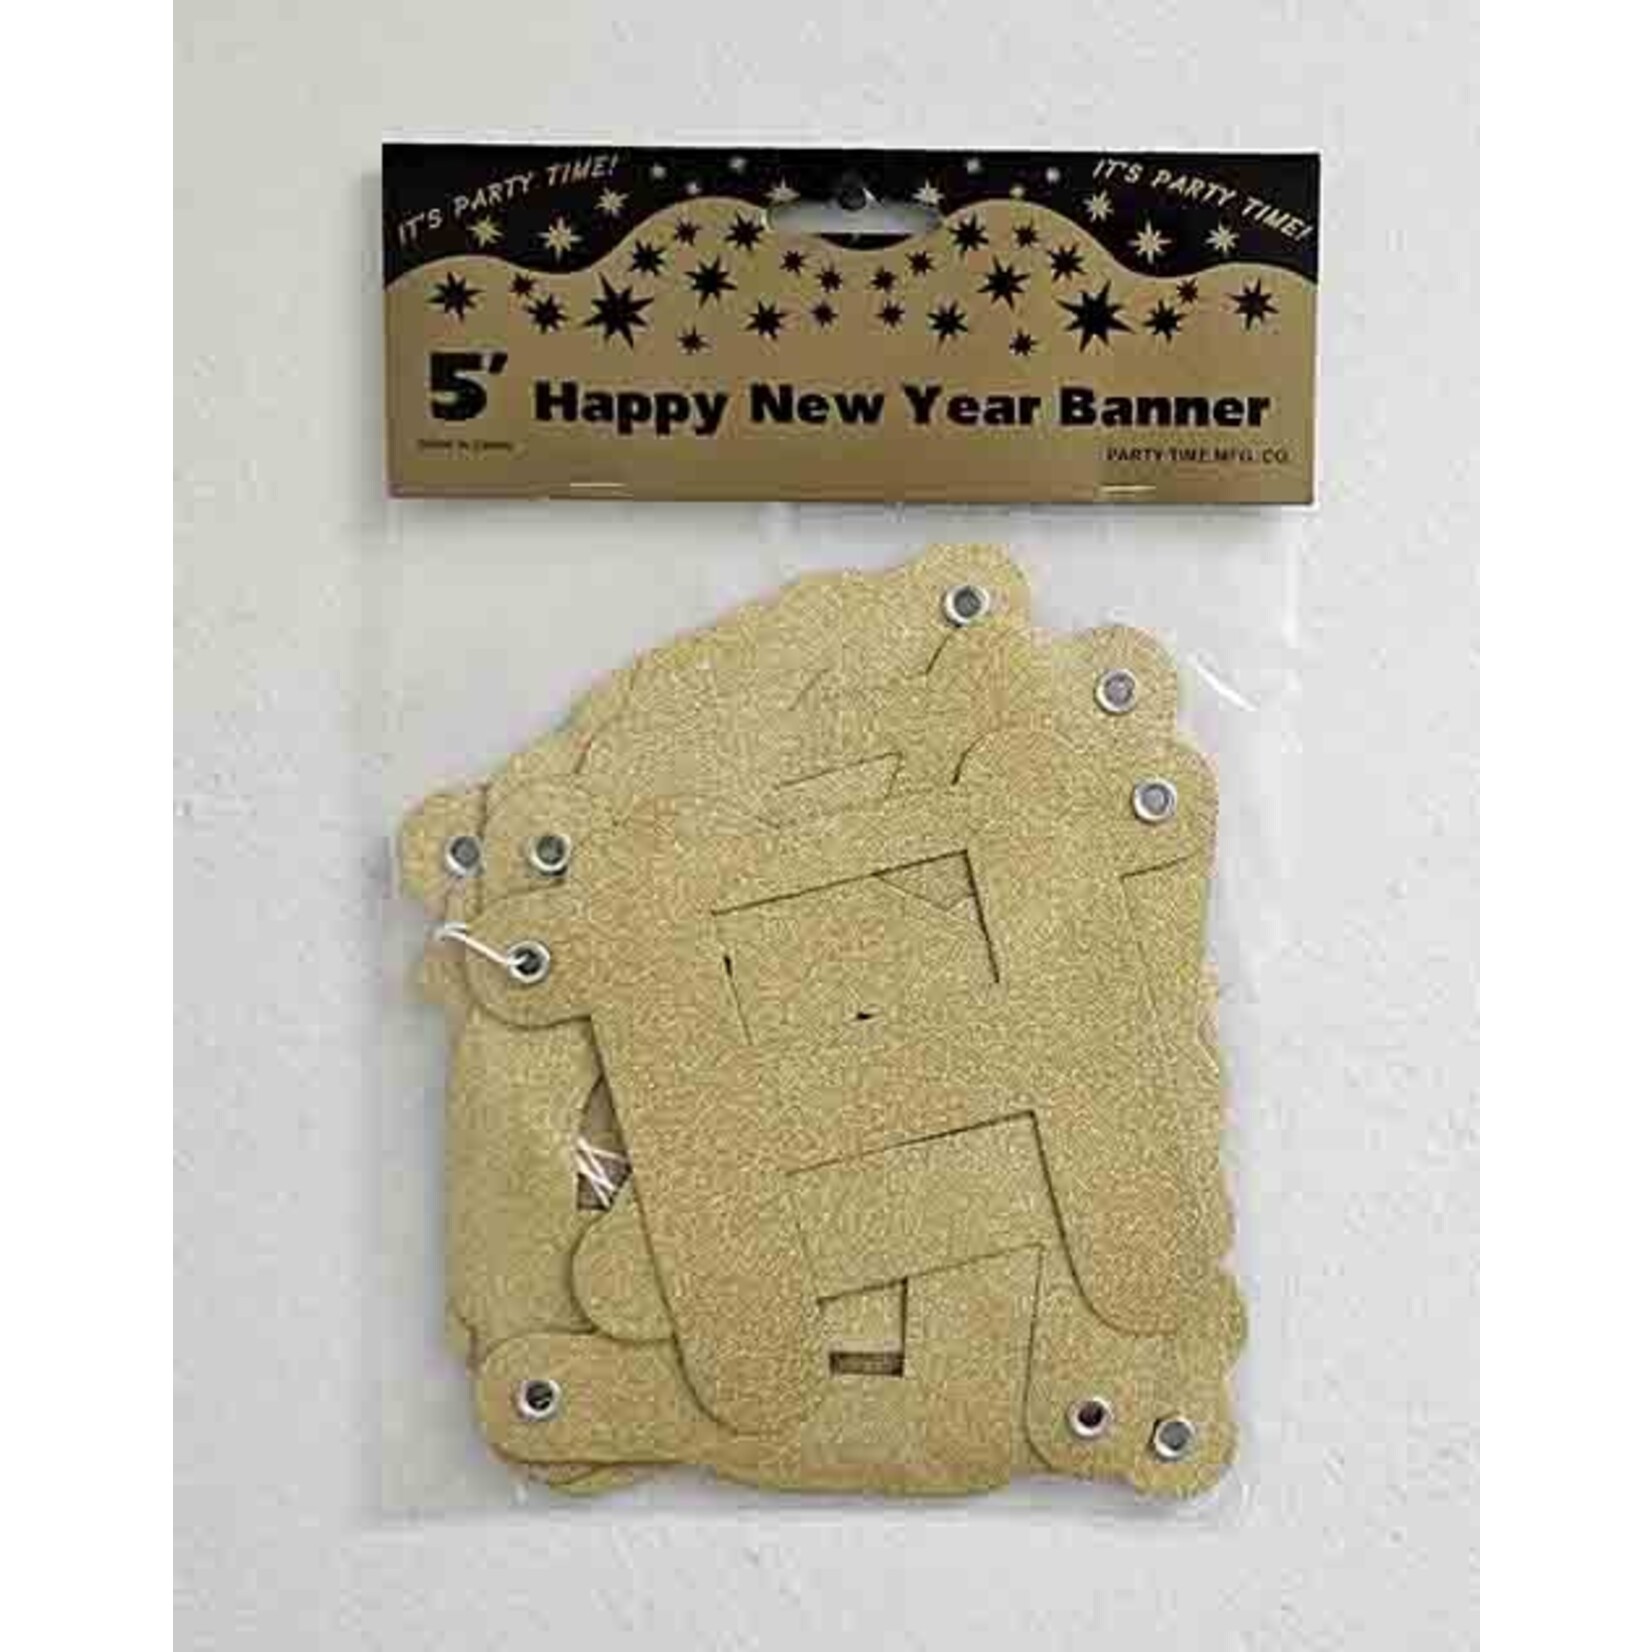 party time 5' Gold Happy New Year Glitter Banner - 1ct.